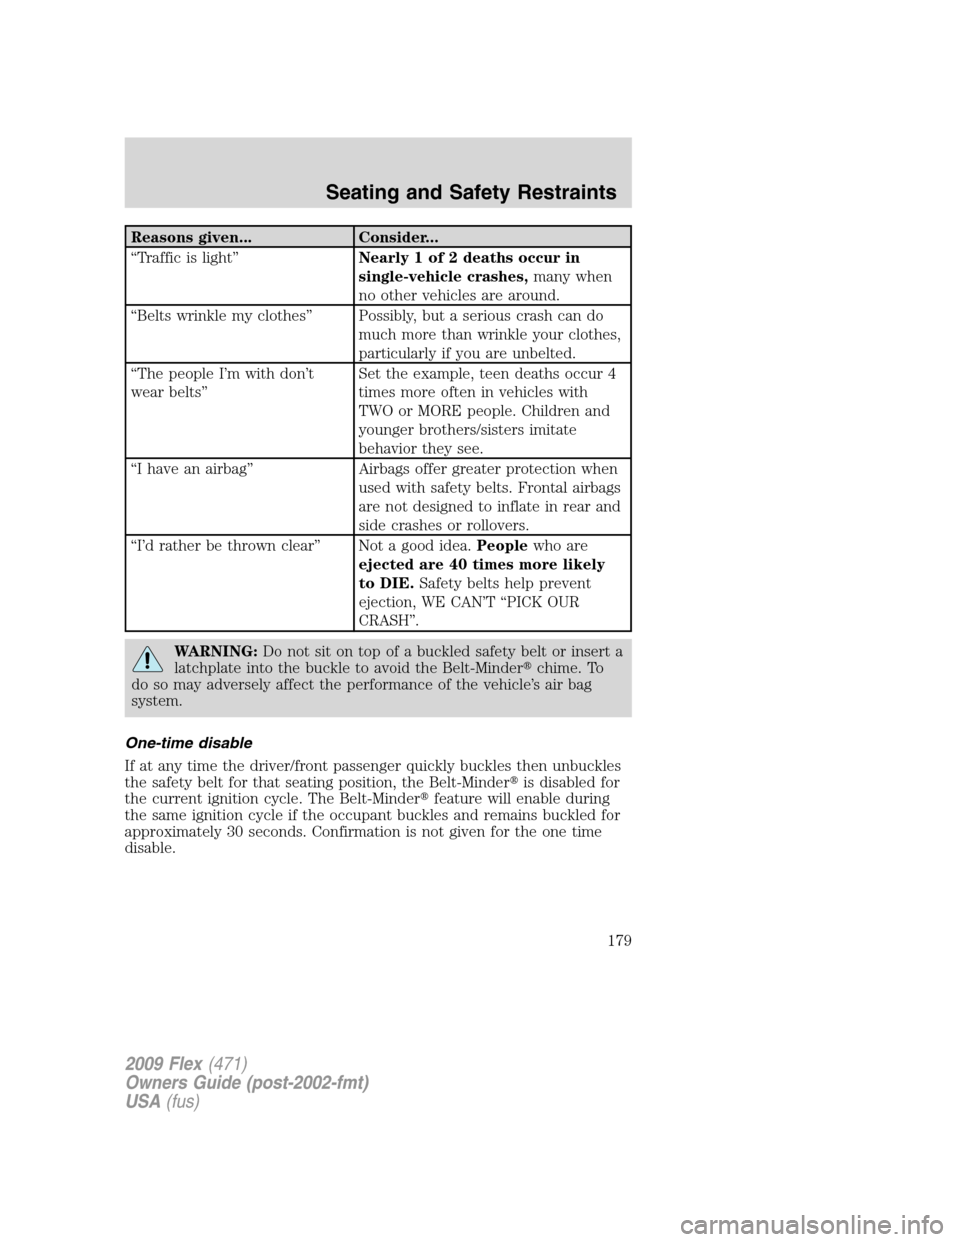 FORD FLEX 2009 1.G Owners Manual Reasons given... Consider...
“Traffic is light”Nearly 1 of 2 deaths occur in
single-vehicle crashes,many when
no other vehicles are around.
“Belts wrinkle my clothes” Possibly, but a serious c